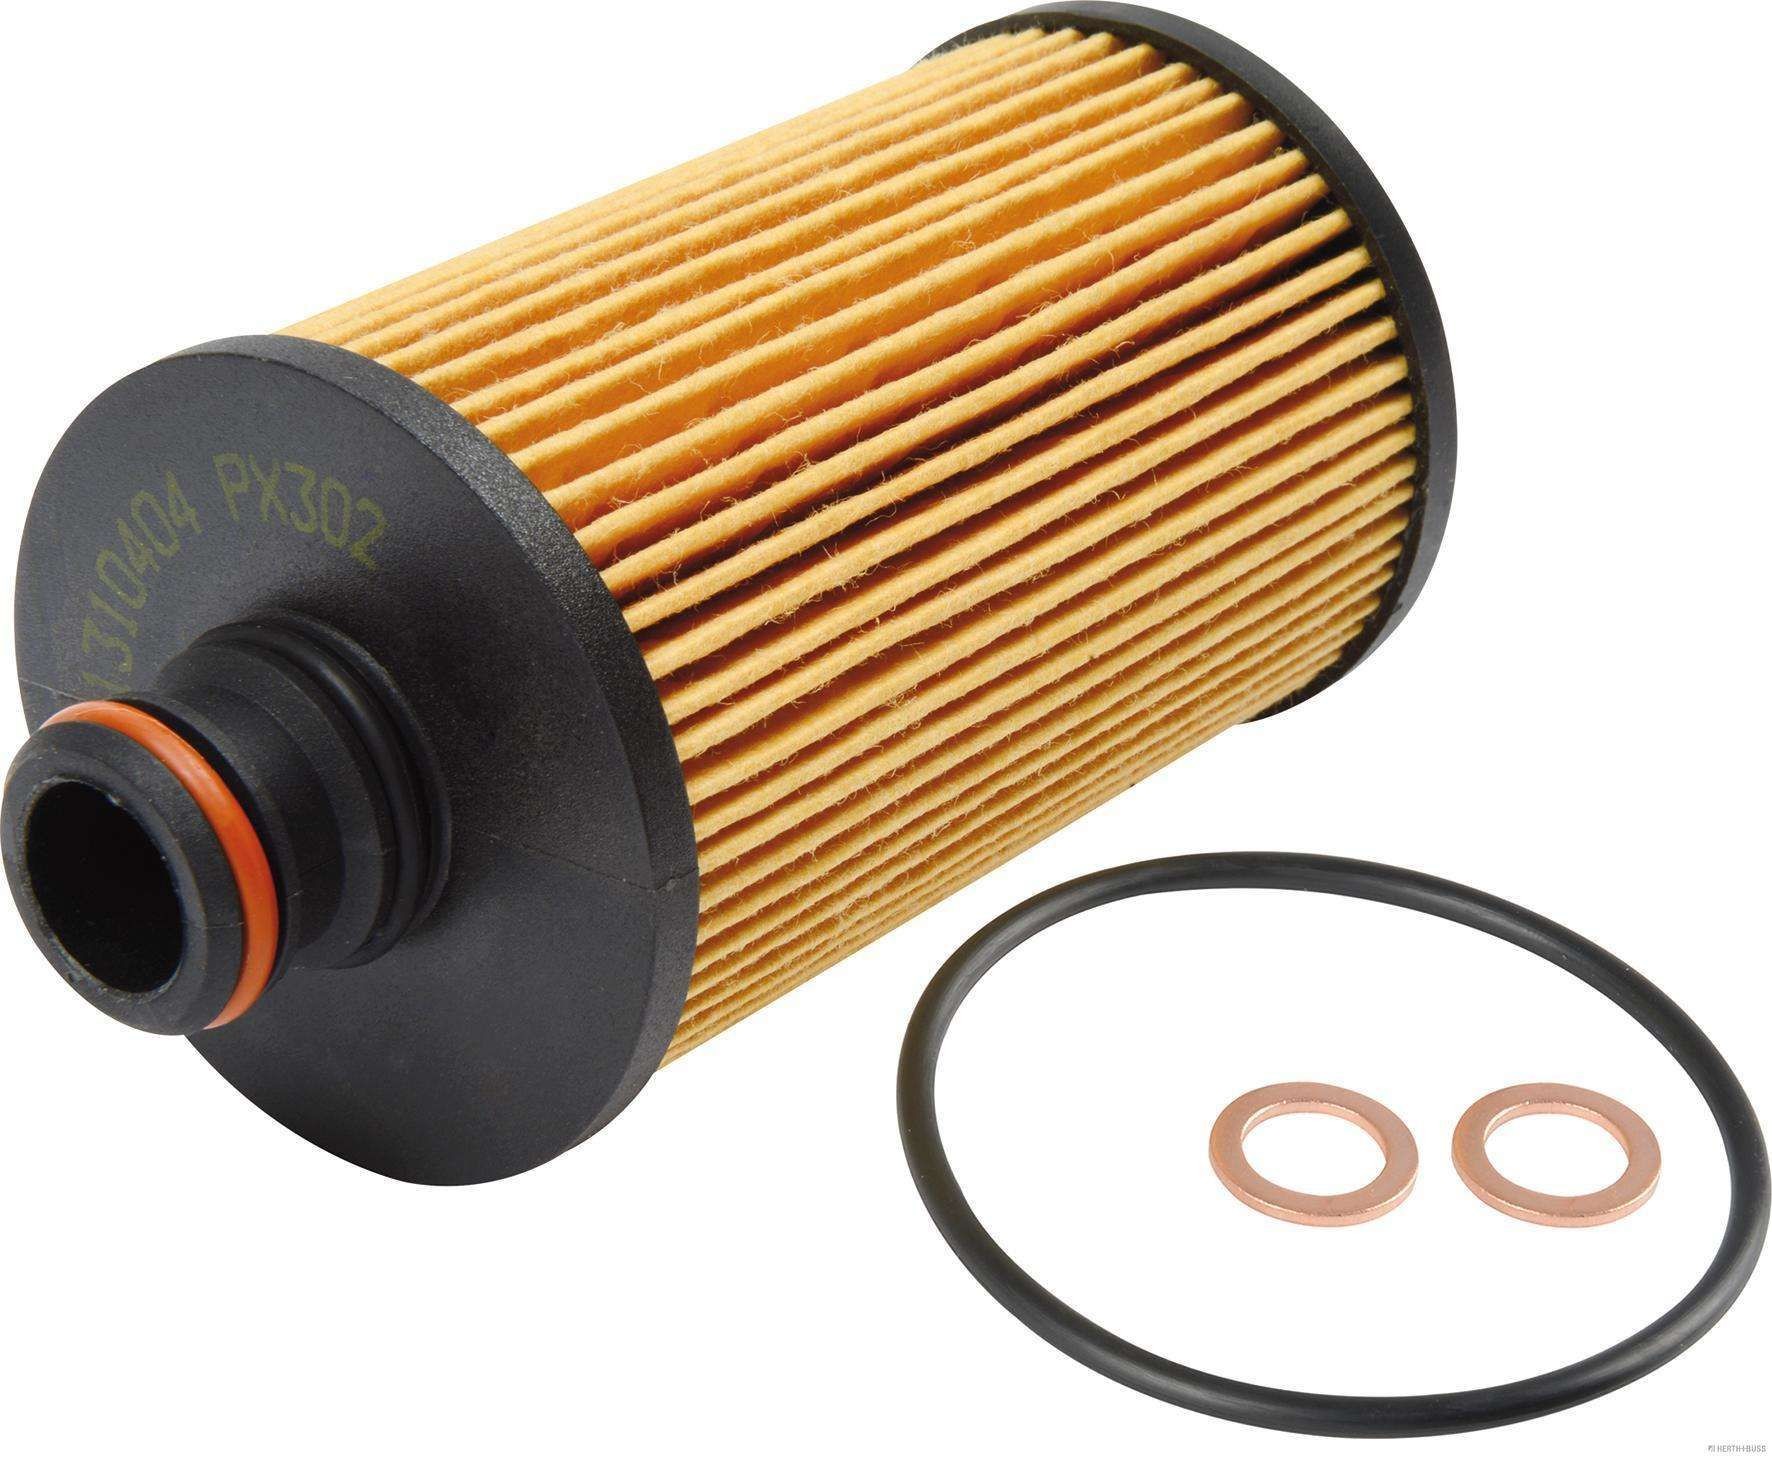 HERTH+BUSS JAKOPARTS J1310404 Oil filter with seal ring, Filter Insert